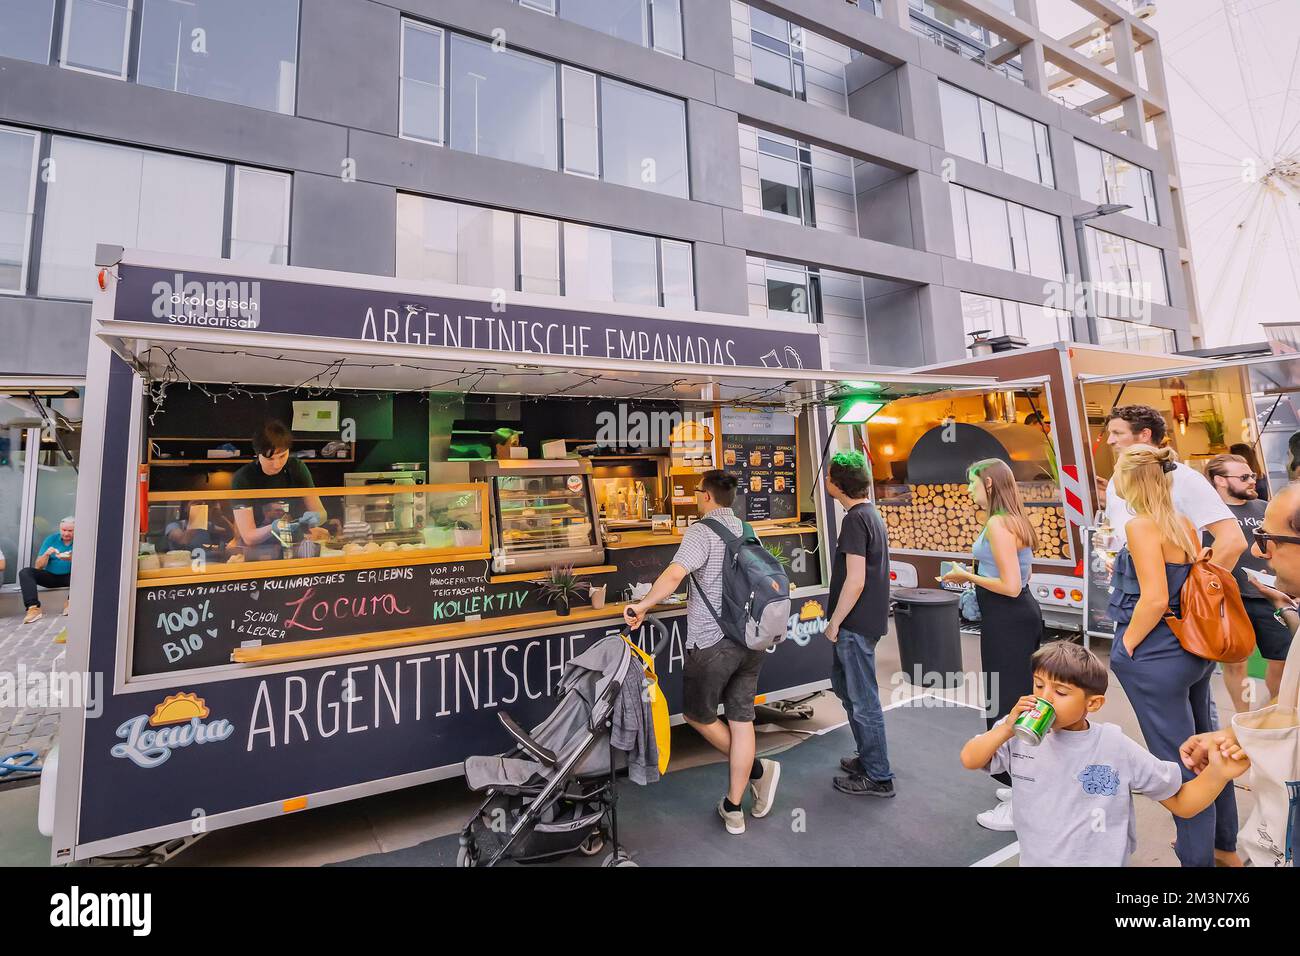 29 July 2022, Cologne, Germany: Foodtruck stall selling argentina empanadas street food cuisine at openair festival in Koln. Stock Photo